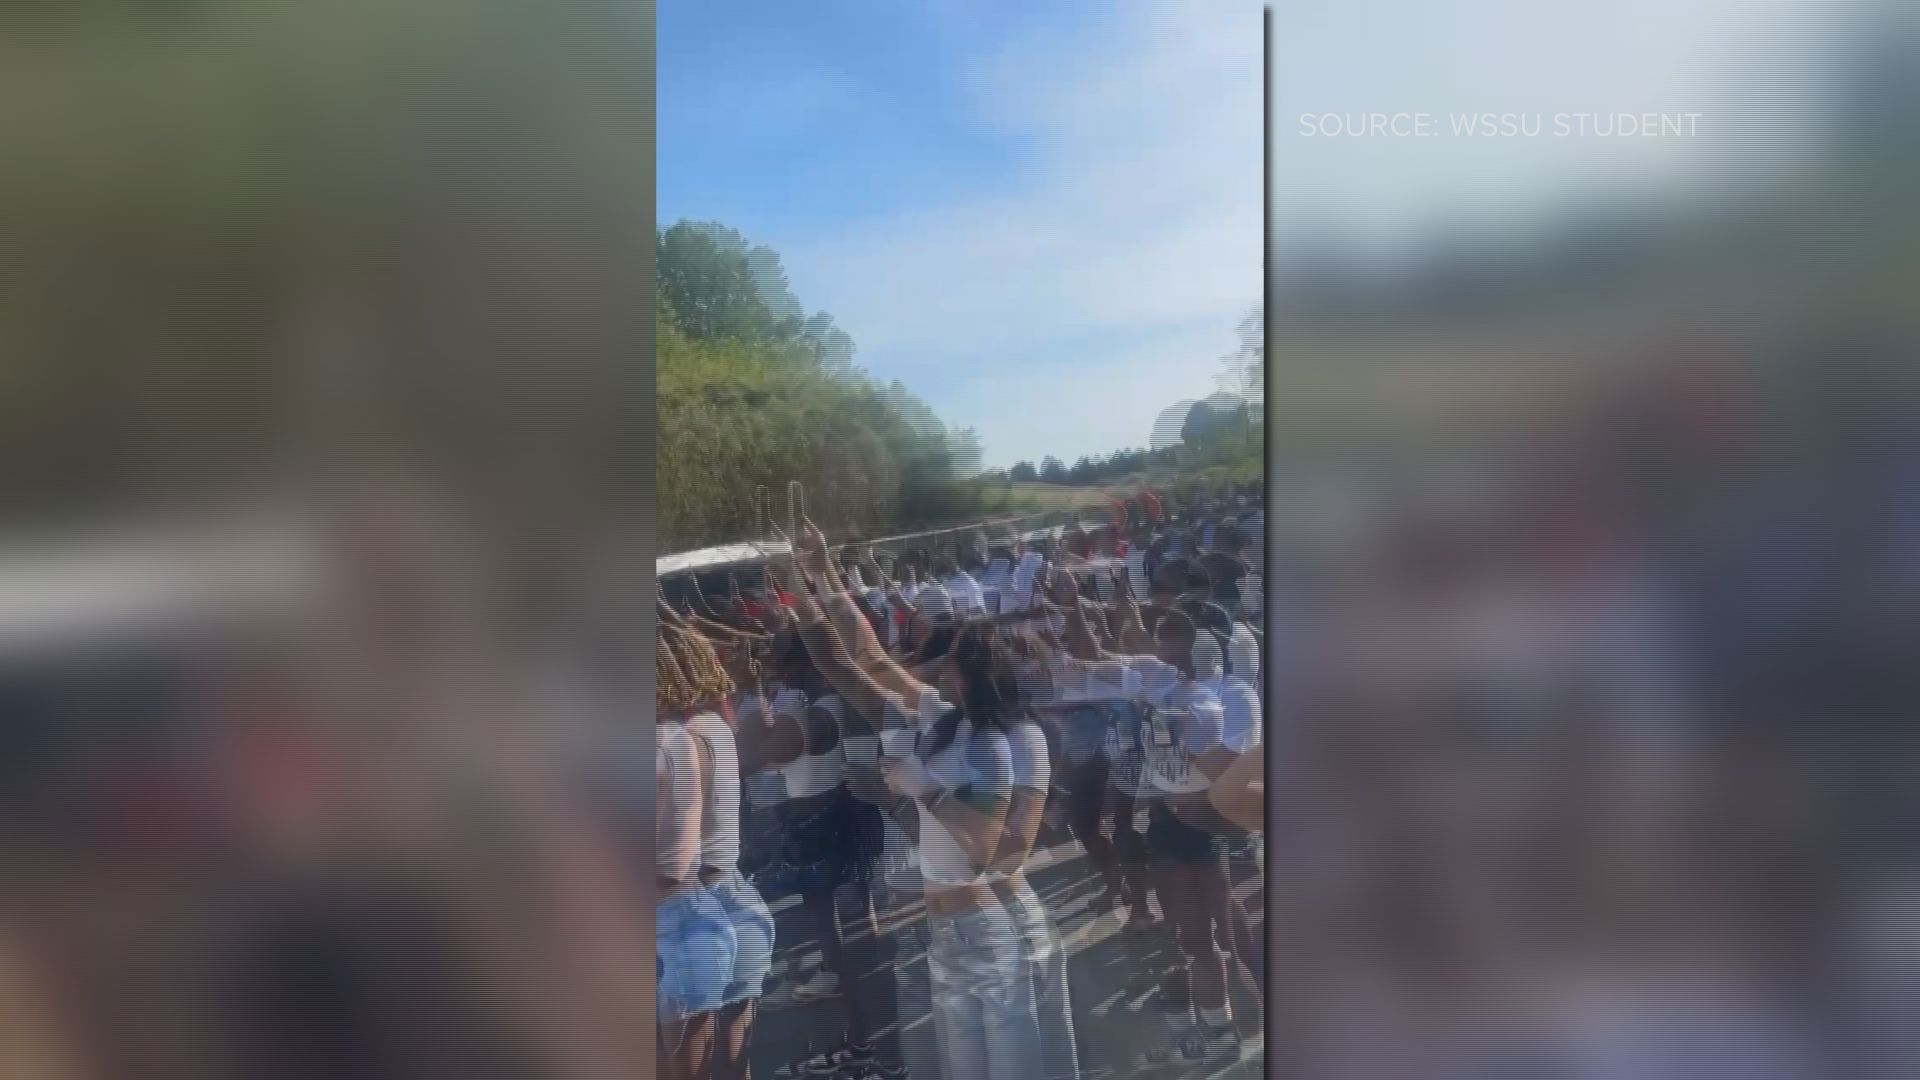 A WSSU student sent WFMY this video, and said this was taken during the party on N. Patterson Avenue Tuesday night.